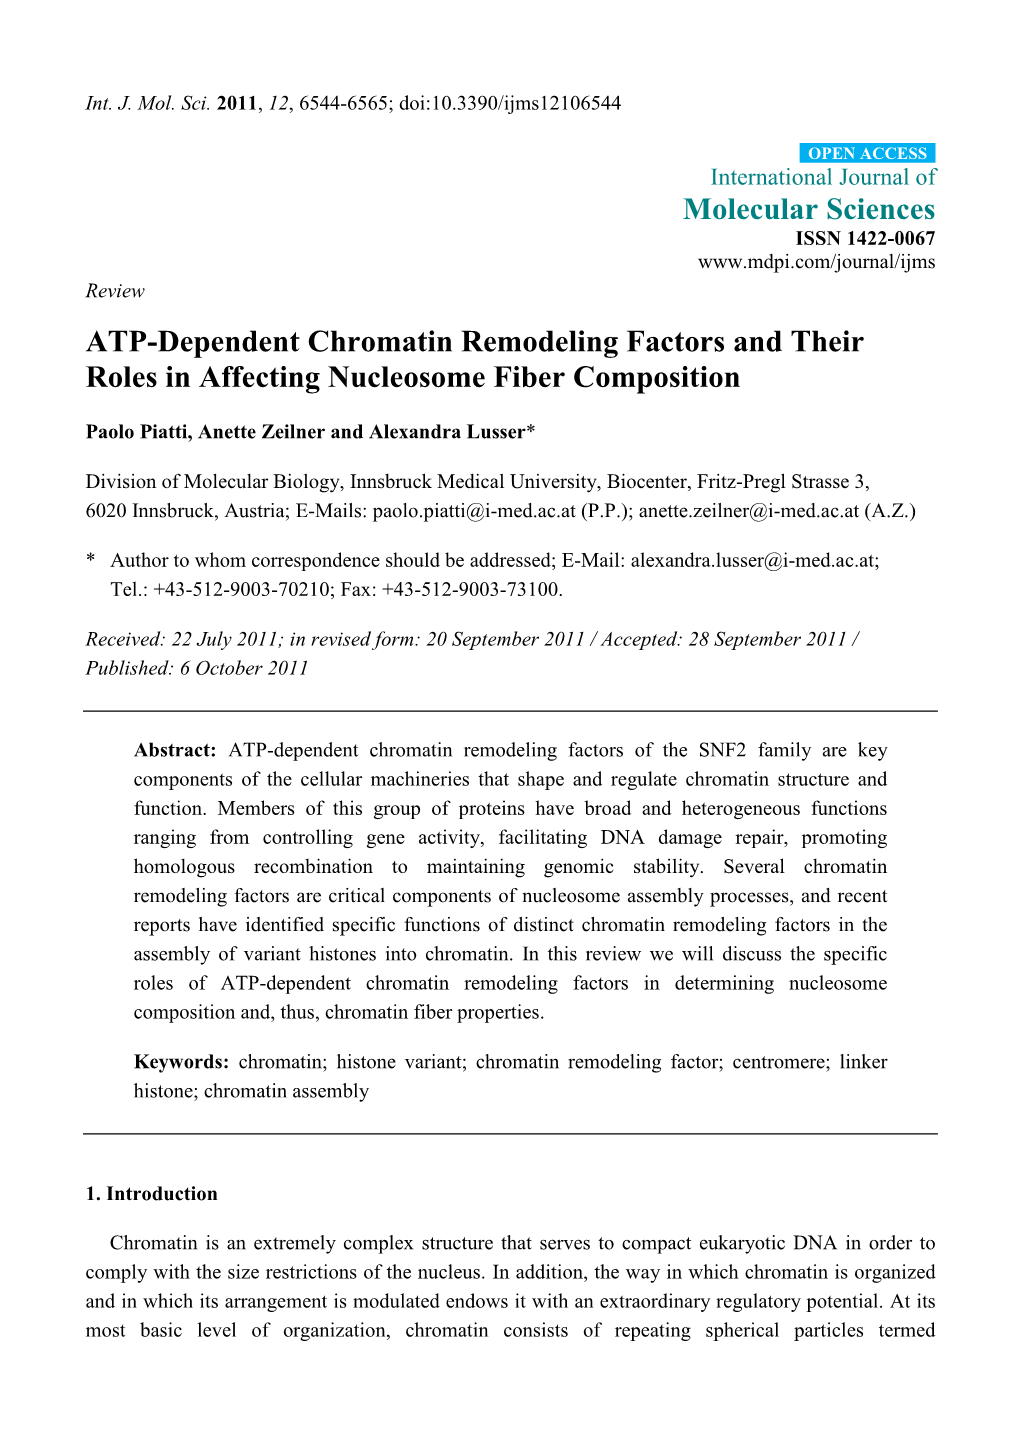 ATP-Dependent Chromatin Remodeling Factors and Their Roles in Affecting Nucleosome Fiber Composition